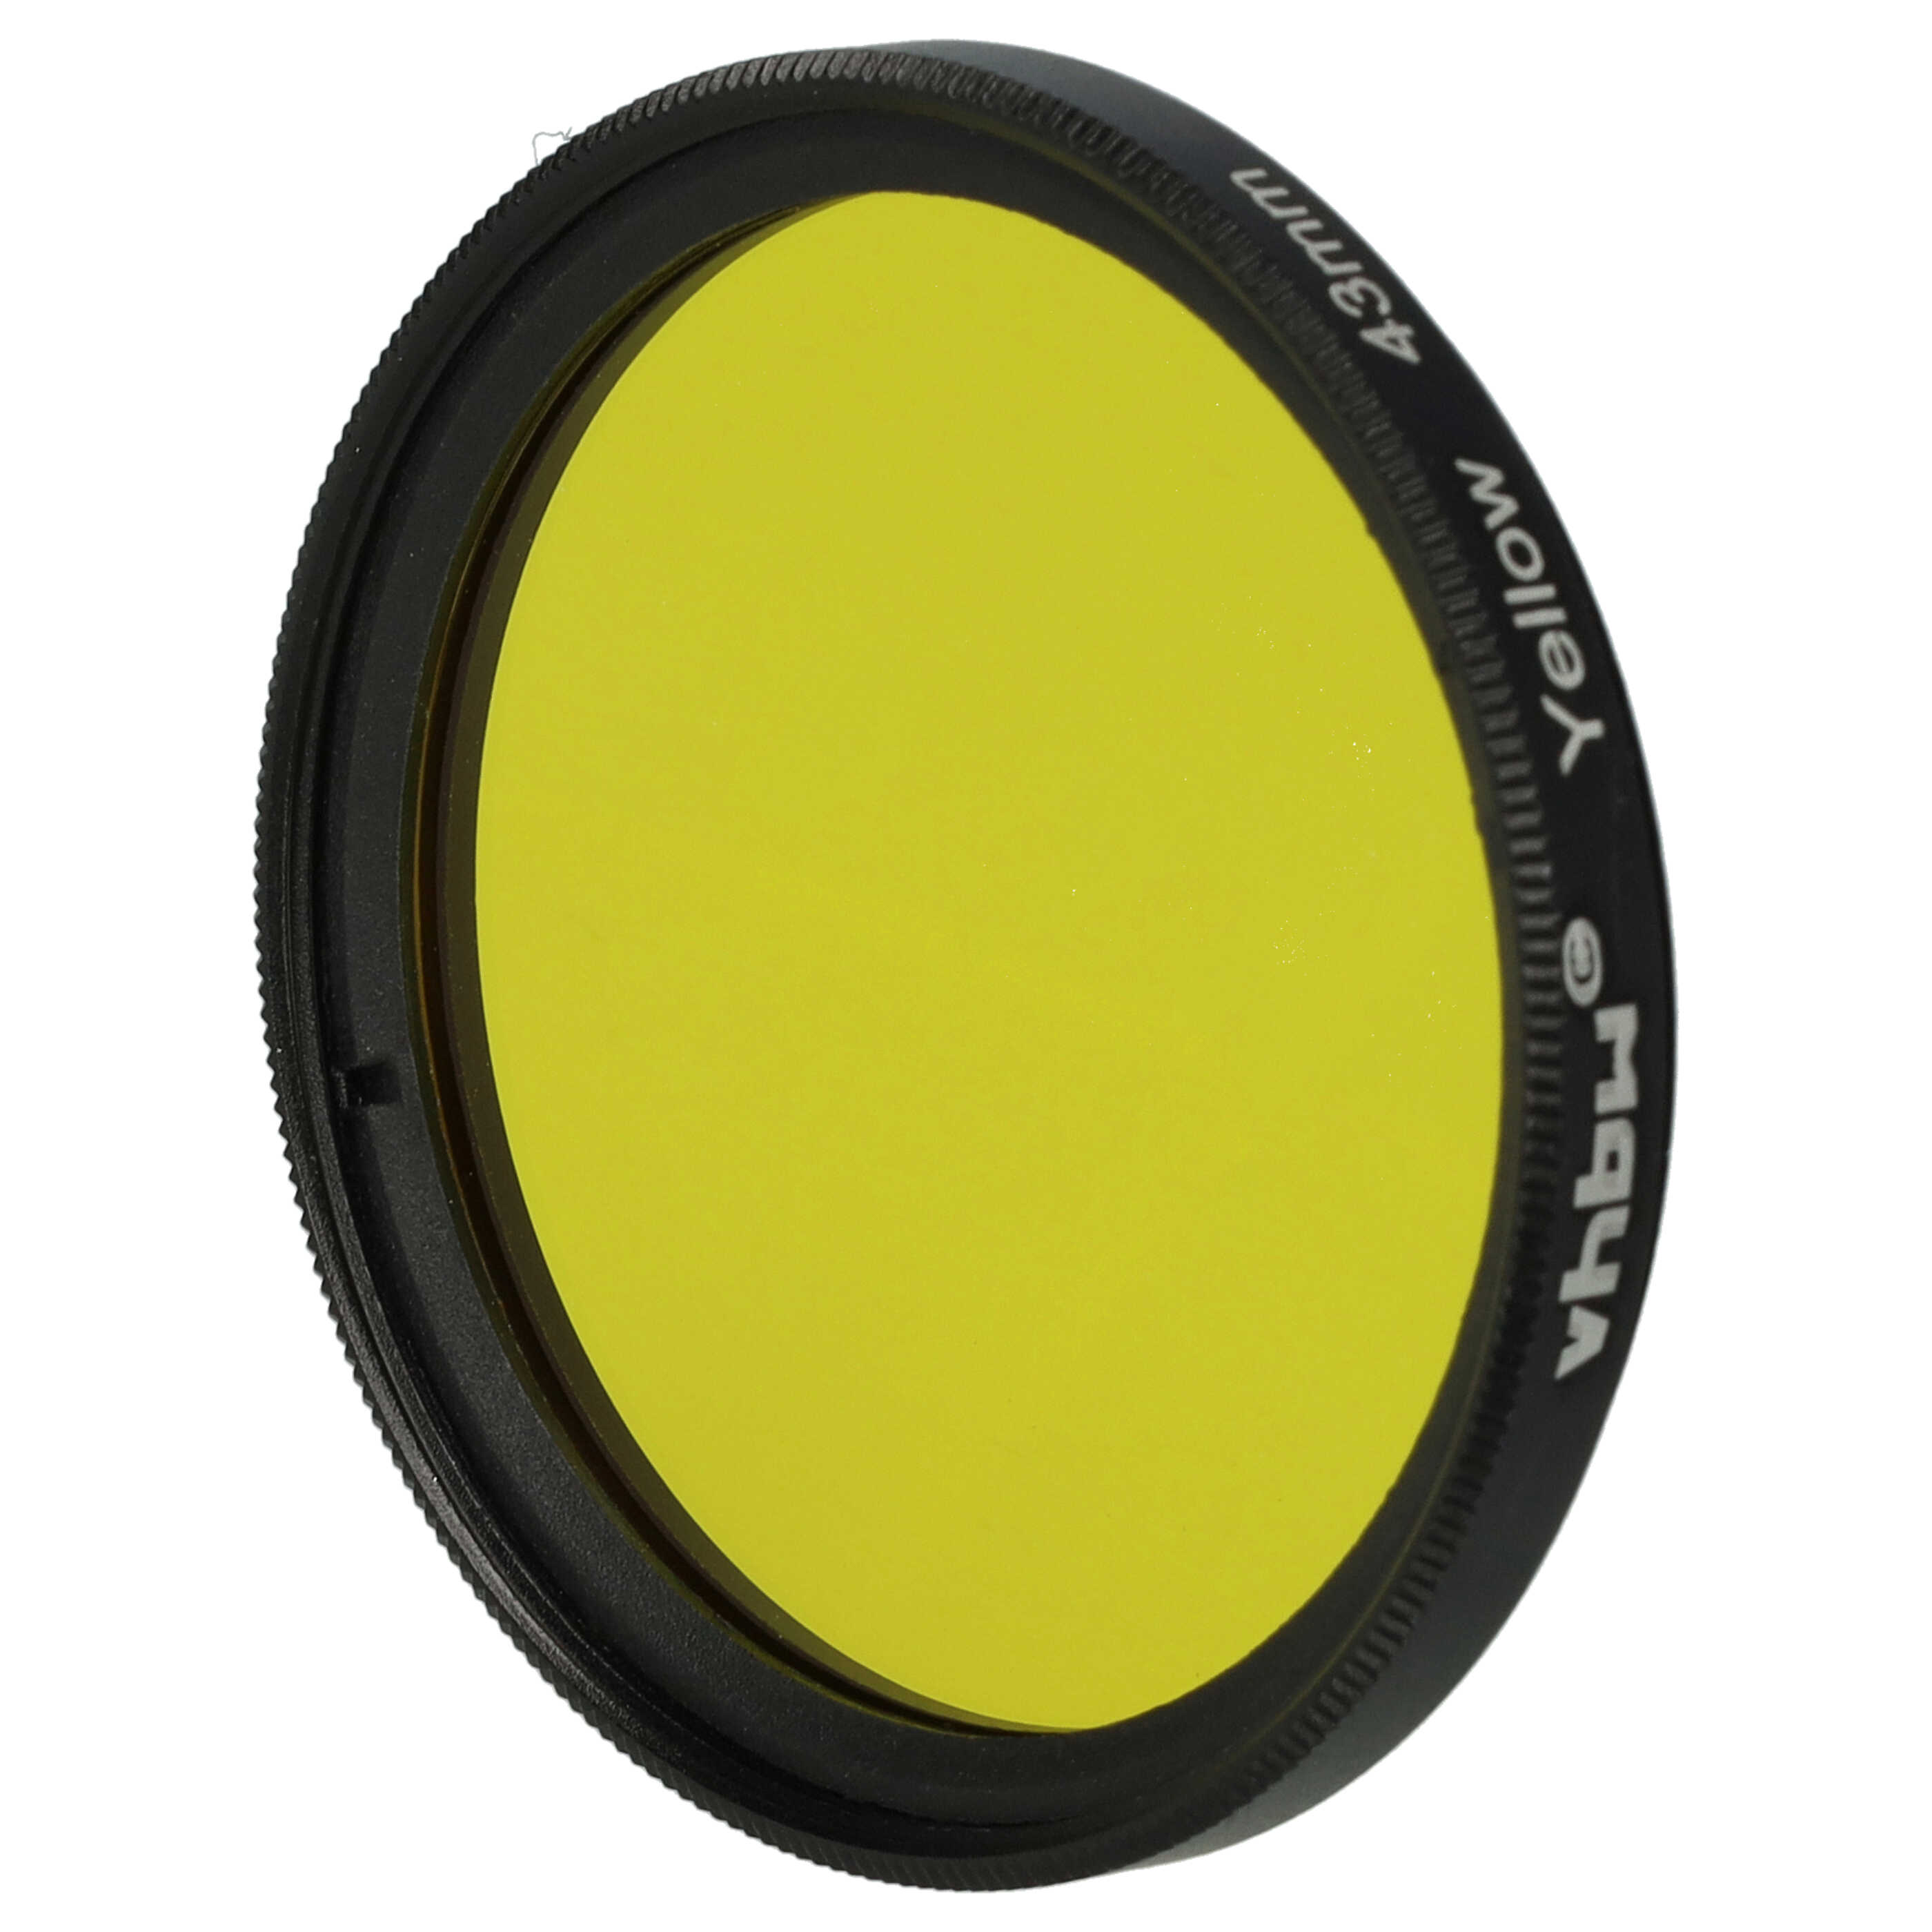 Coloured Filter, Yellow suitable for Camera Lenses with 43 mm Filter Thread - Yellow Filter